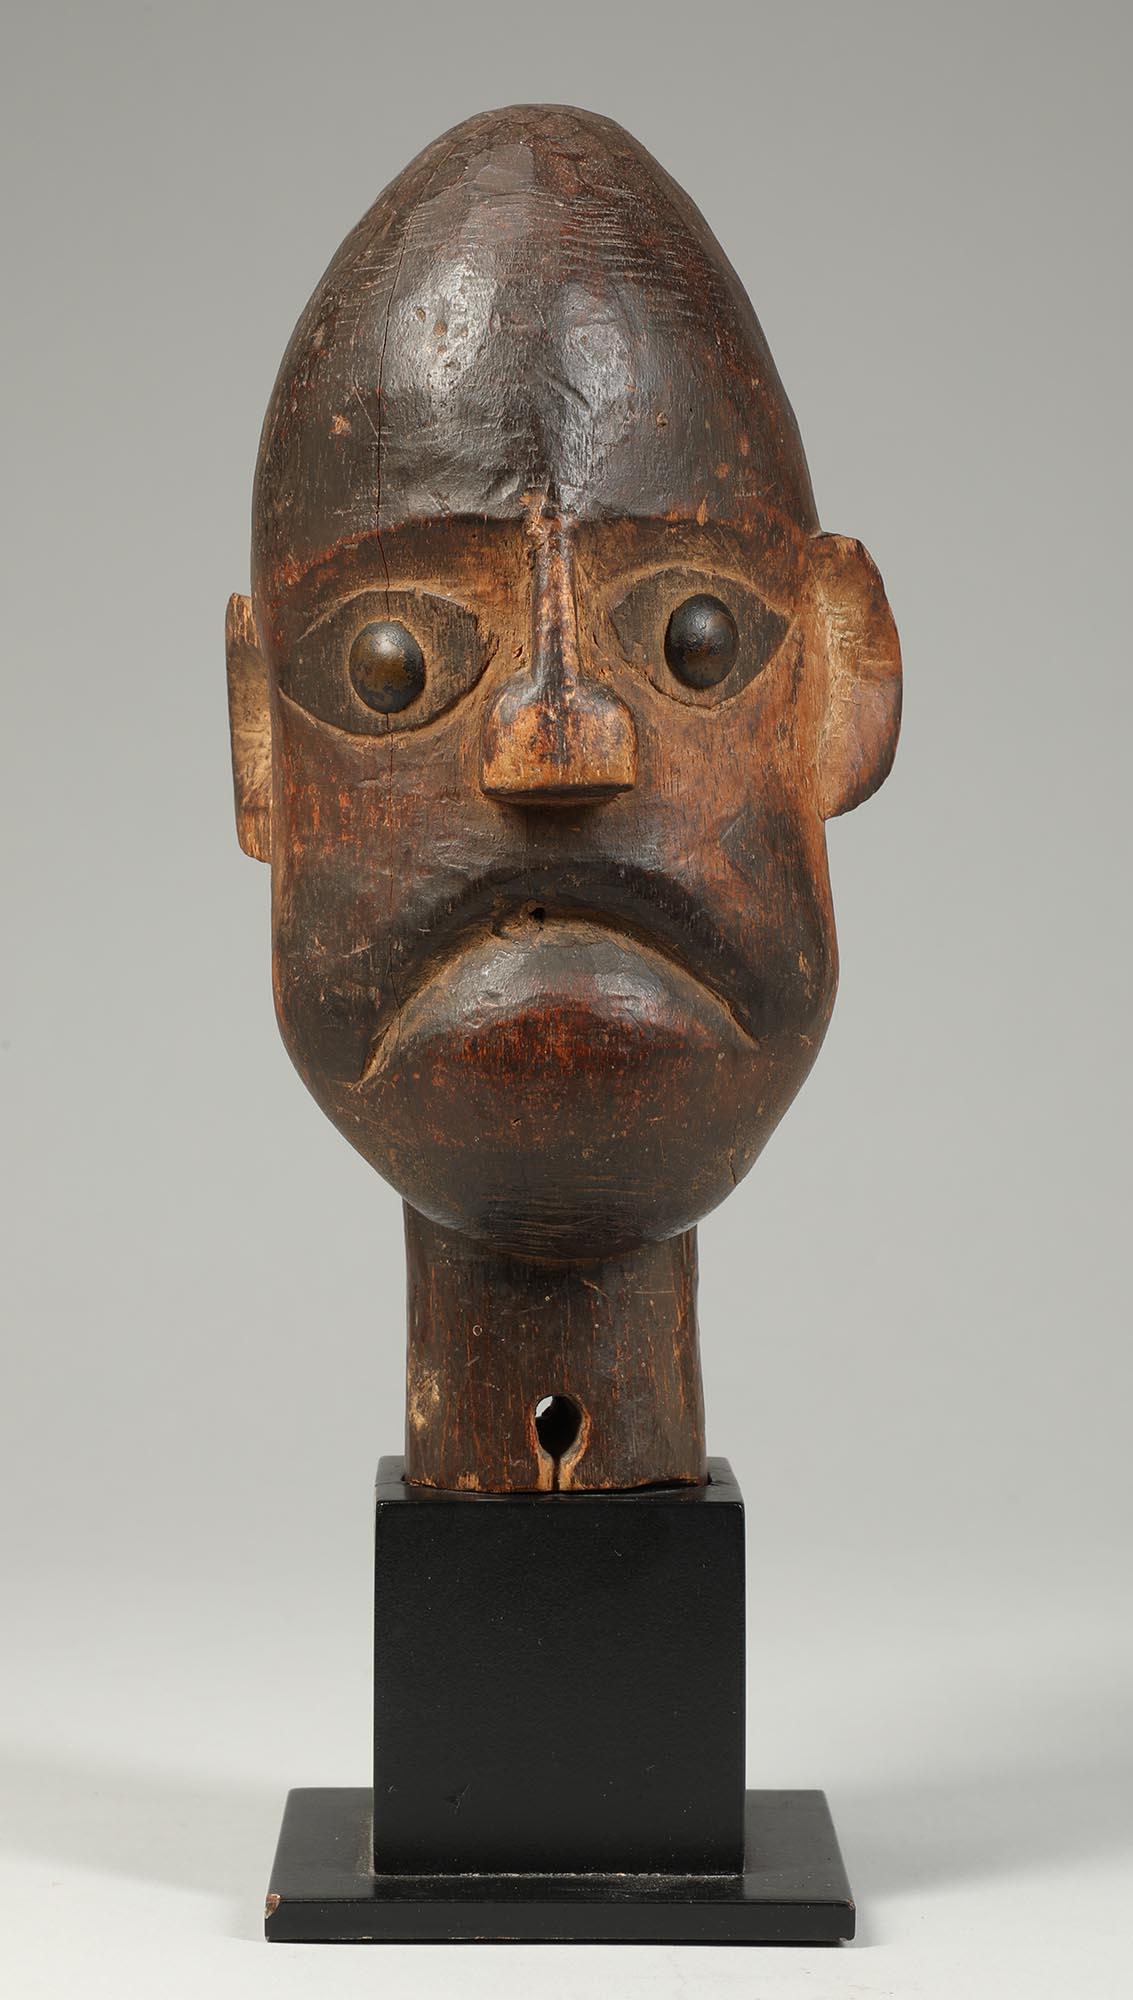 Early Ibibio puppet head with strong stern expression through tightly closed lips, large brass tack eyes. With wood tenon mounted in custom base. 
Total height on base 11 1/4 inches
Field collected in Ghana in 2002.
color is more accurate in the